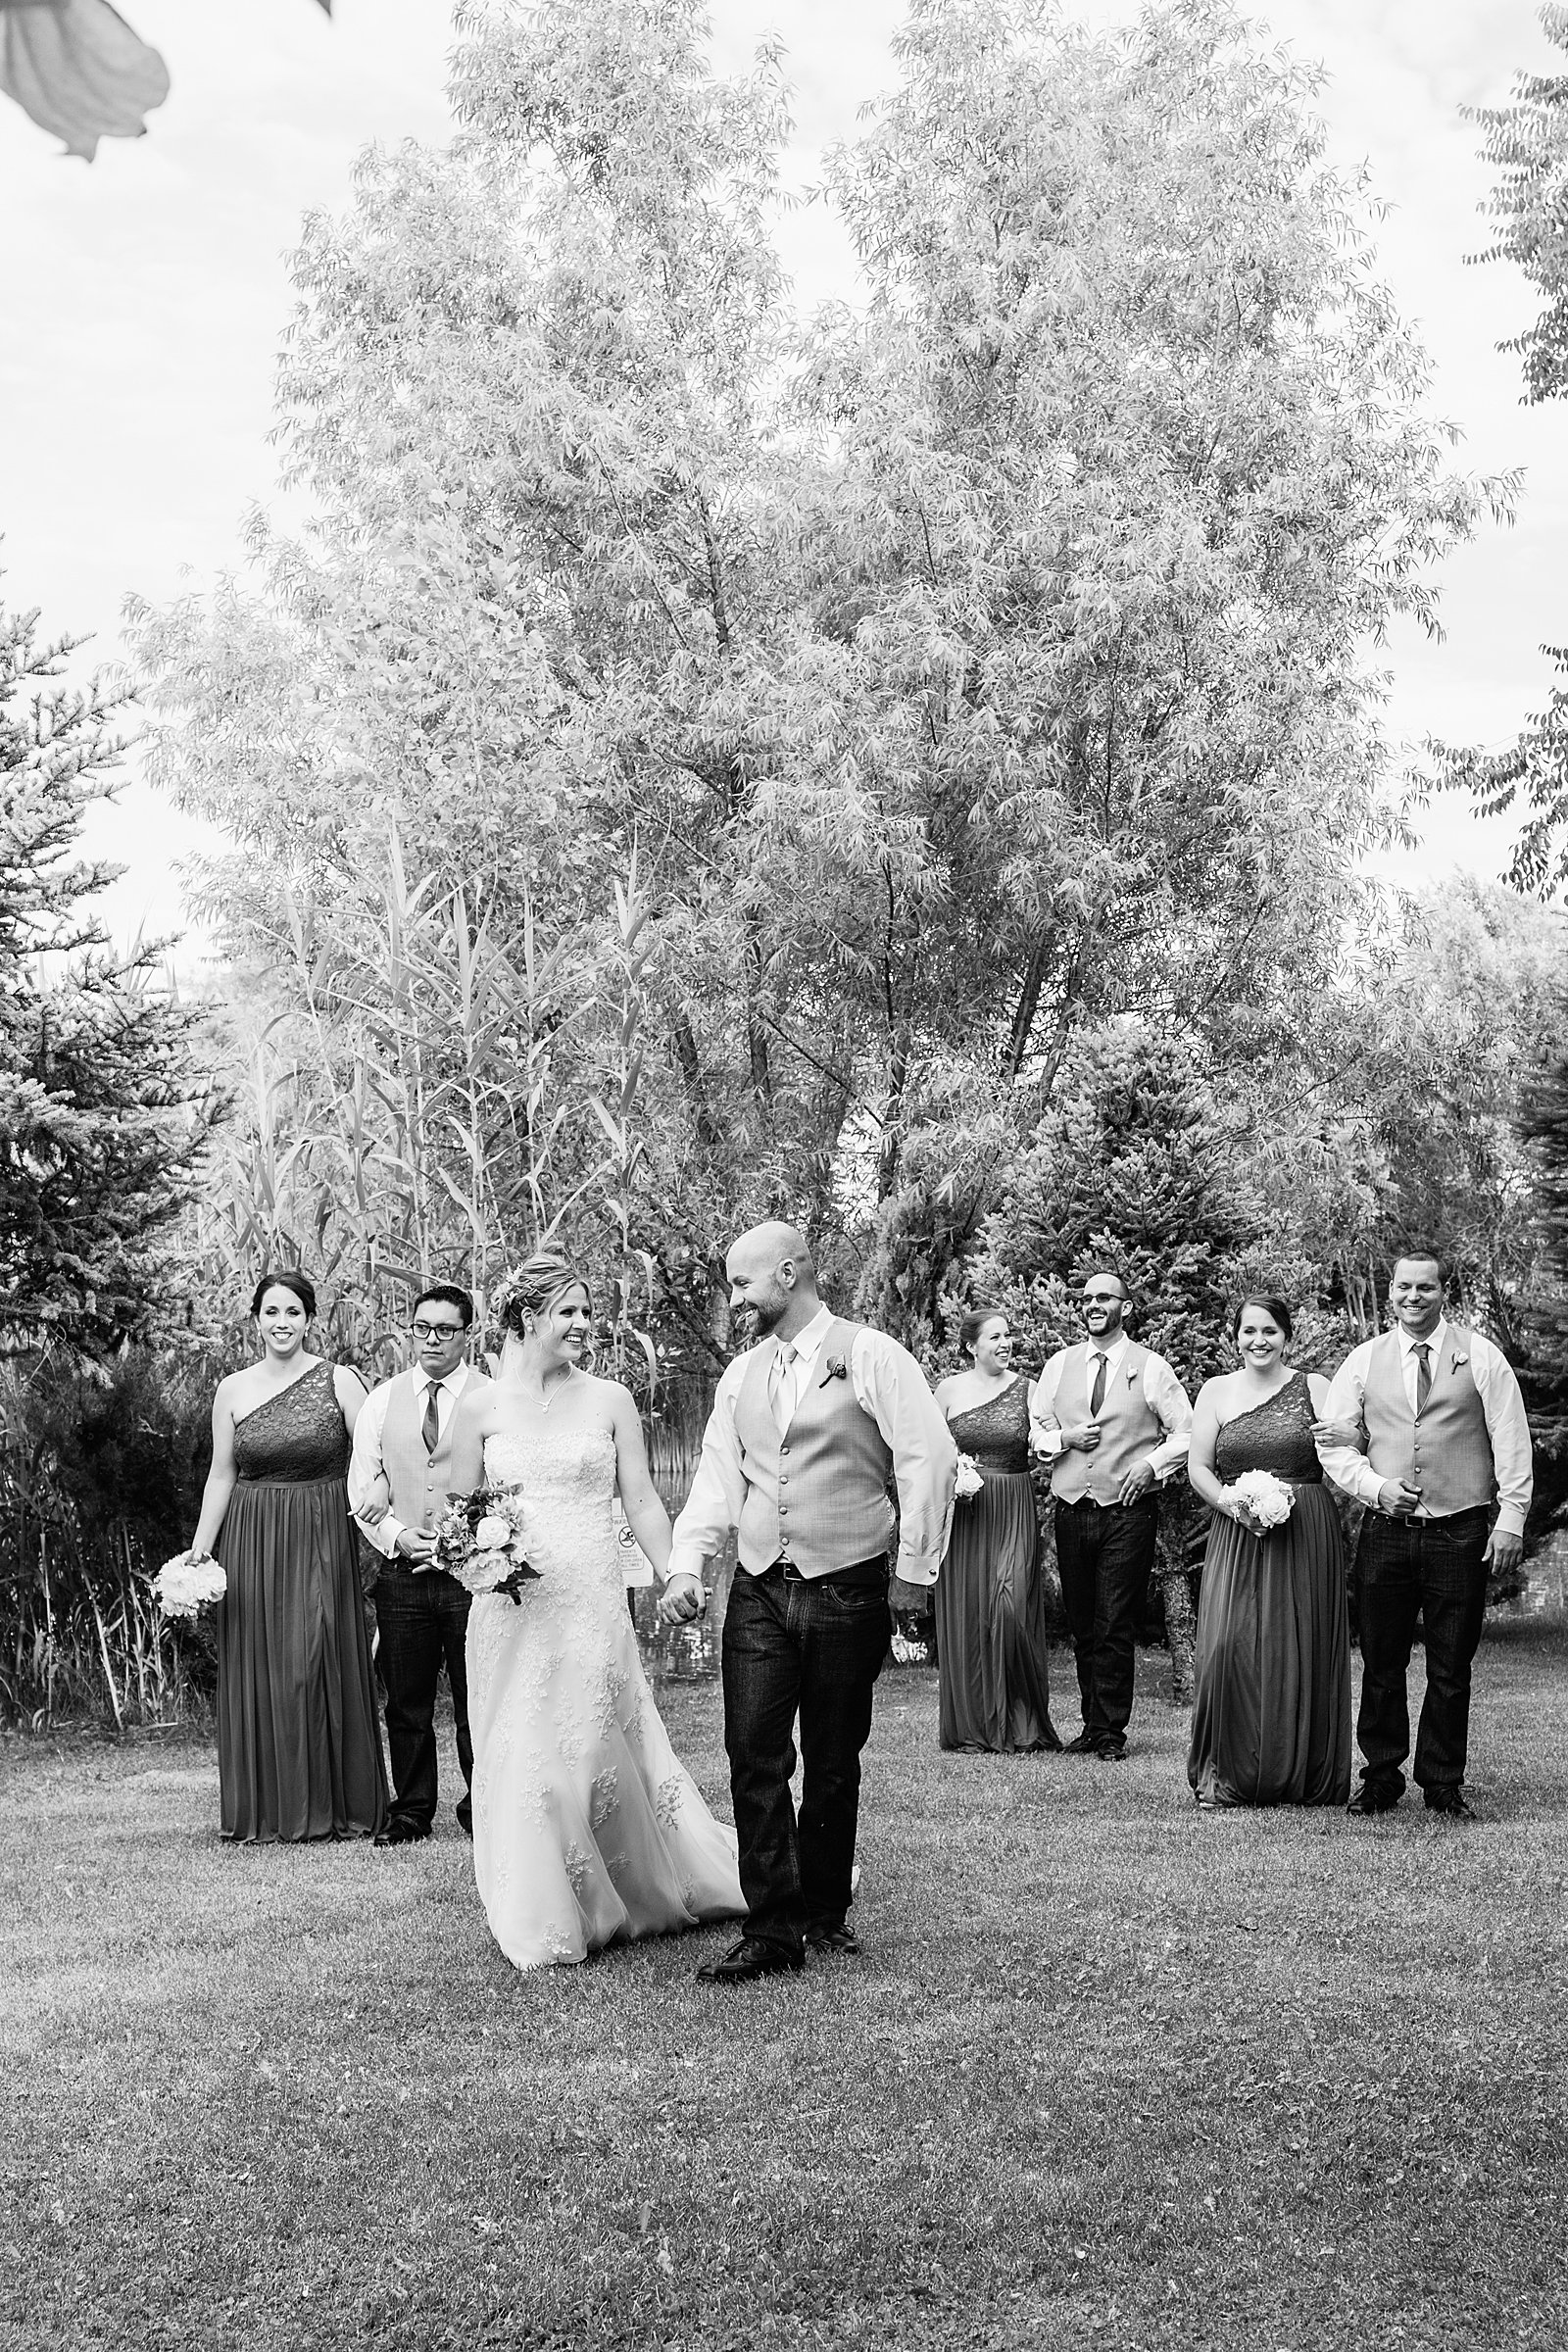 Bridal party walking together at a The Windmill House wedding by Arizona wedding photographer PMA Photography.